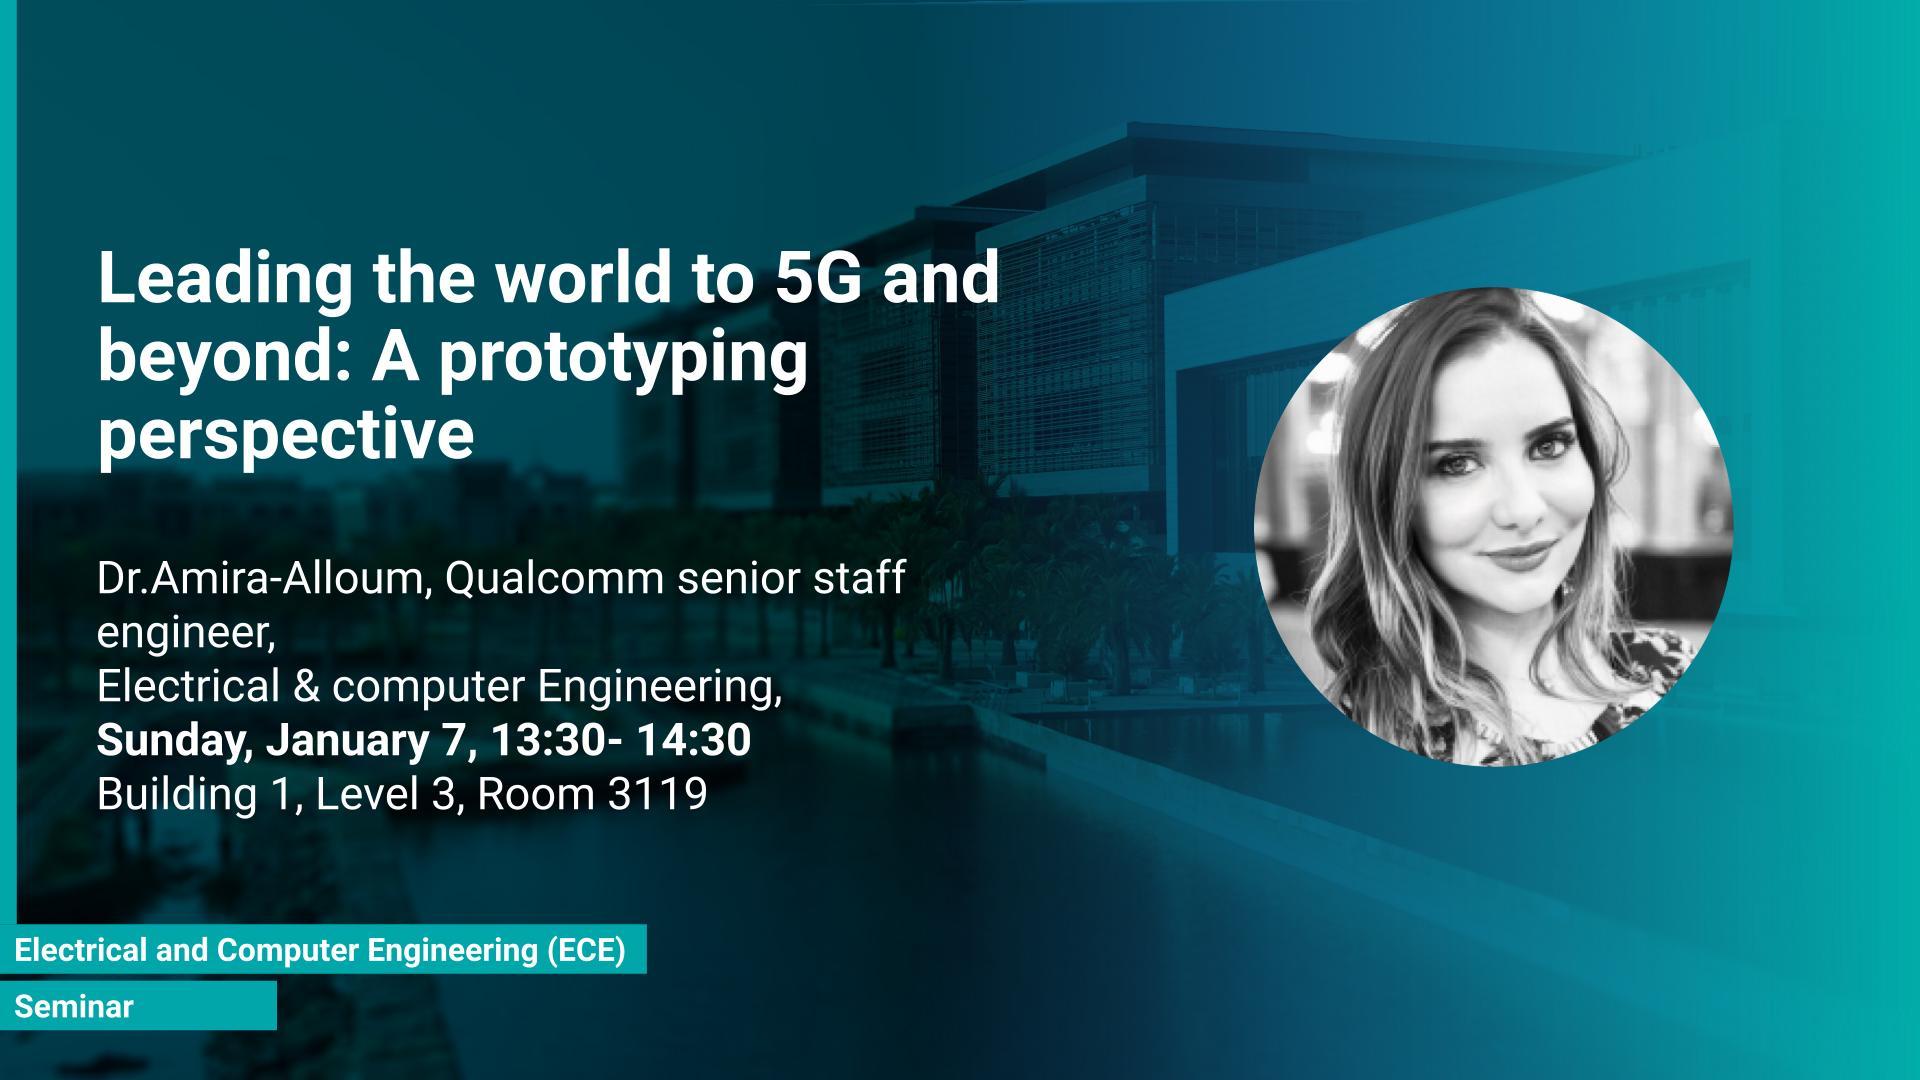      Leading the world to 5G and beyond: A prototyping perspective